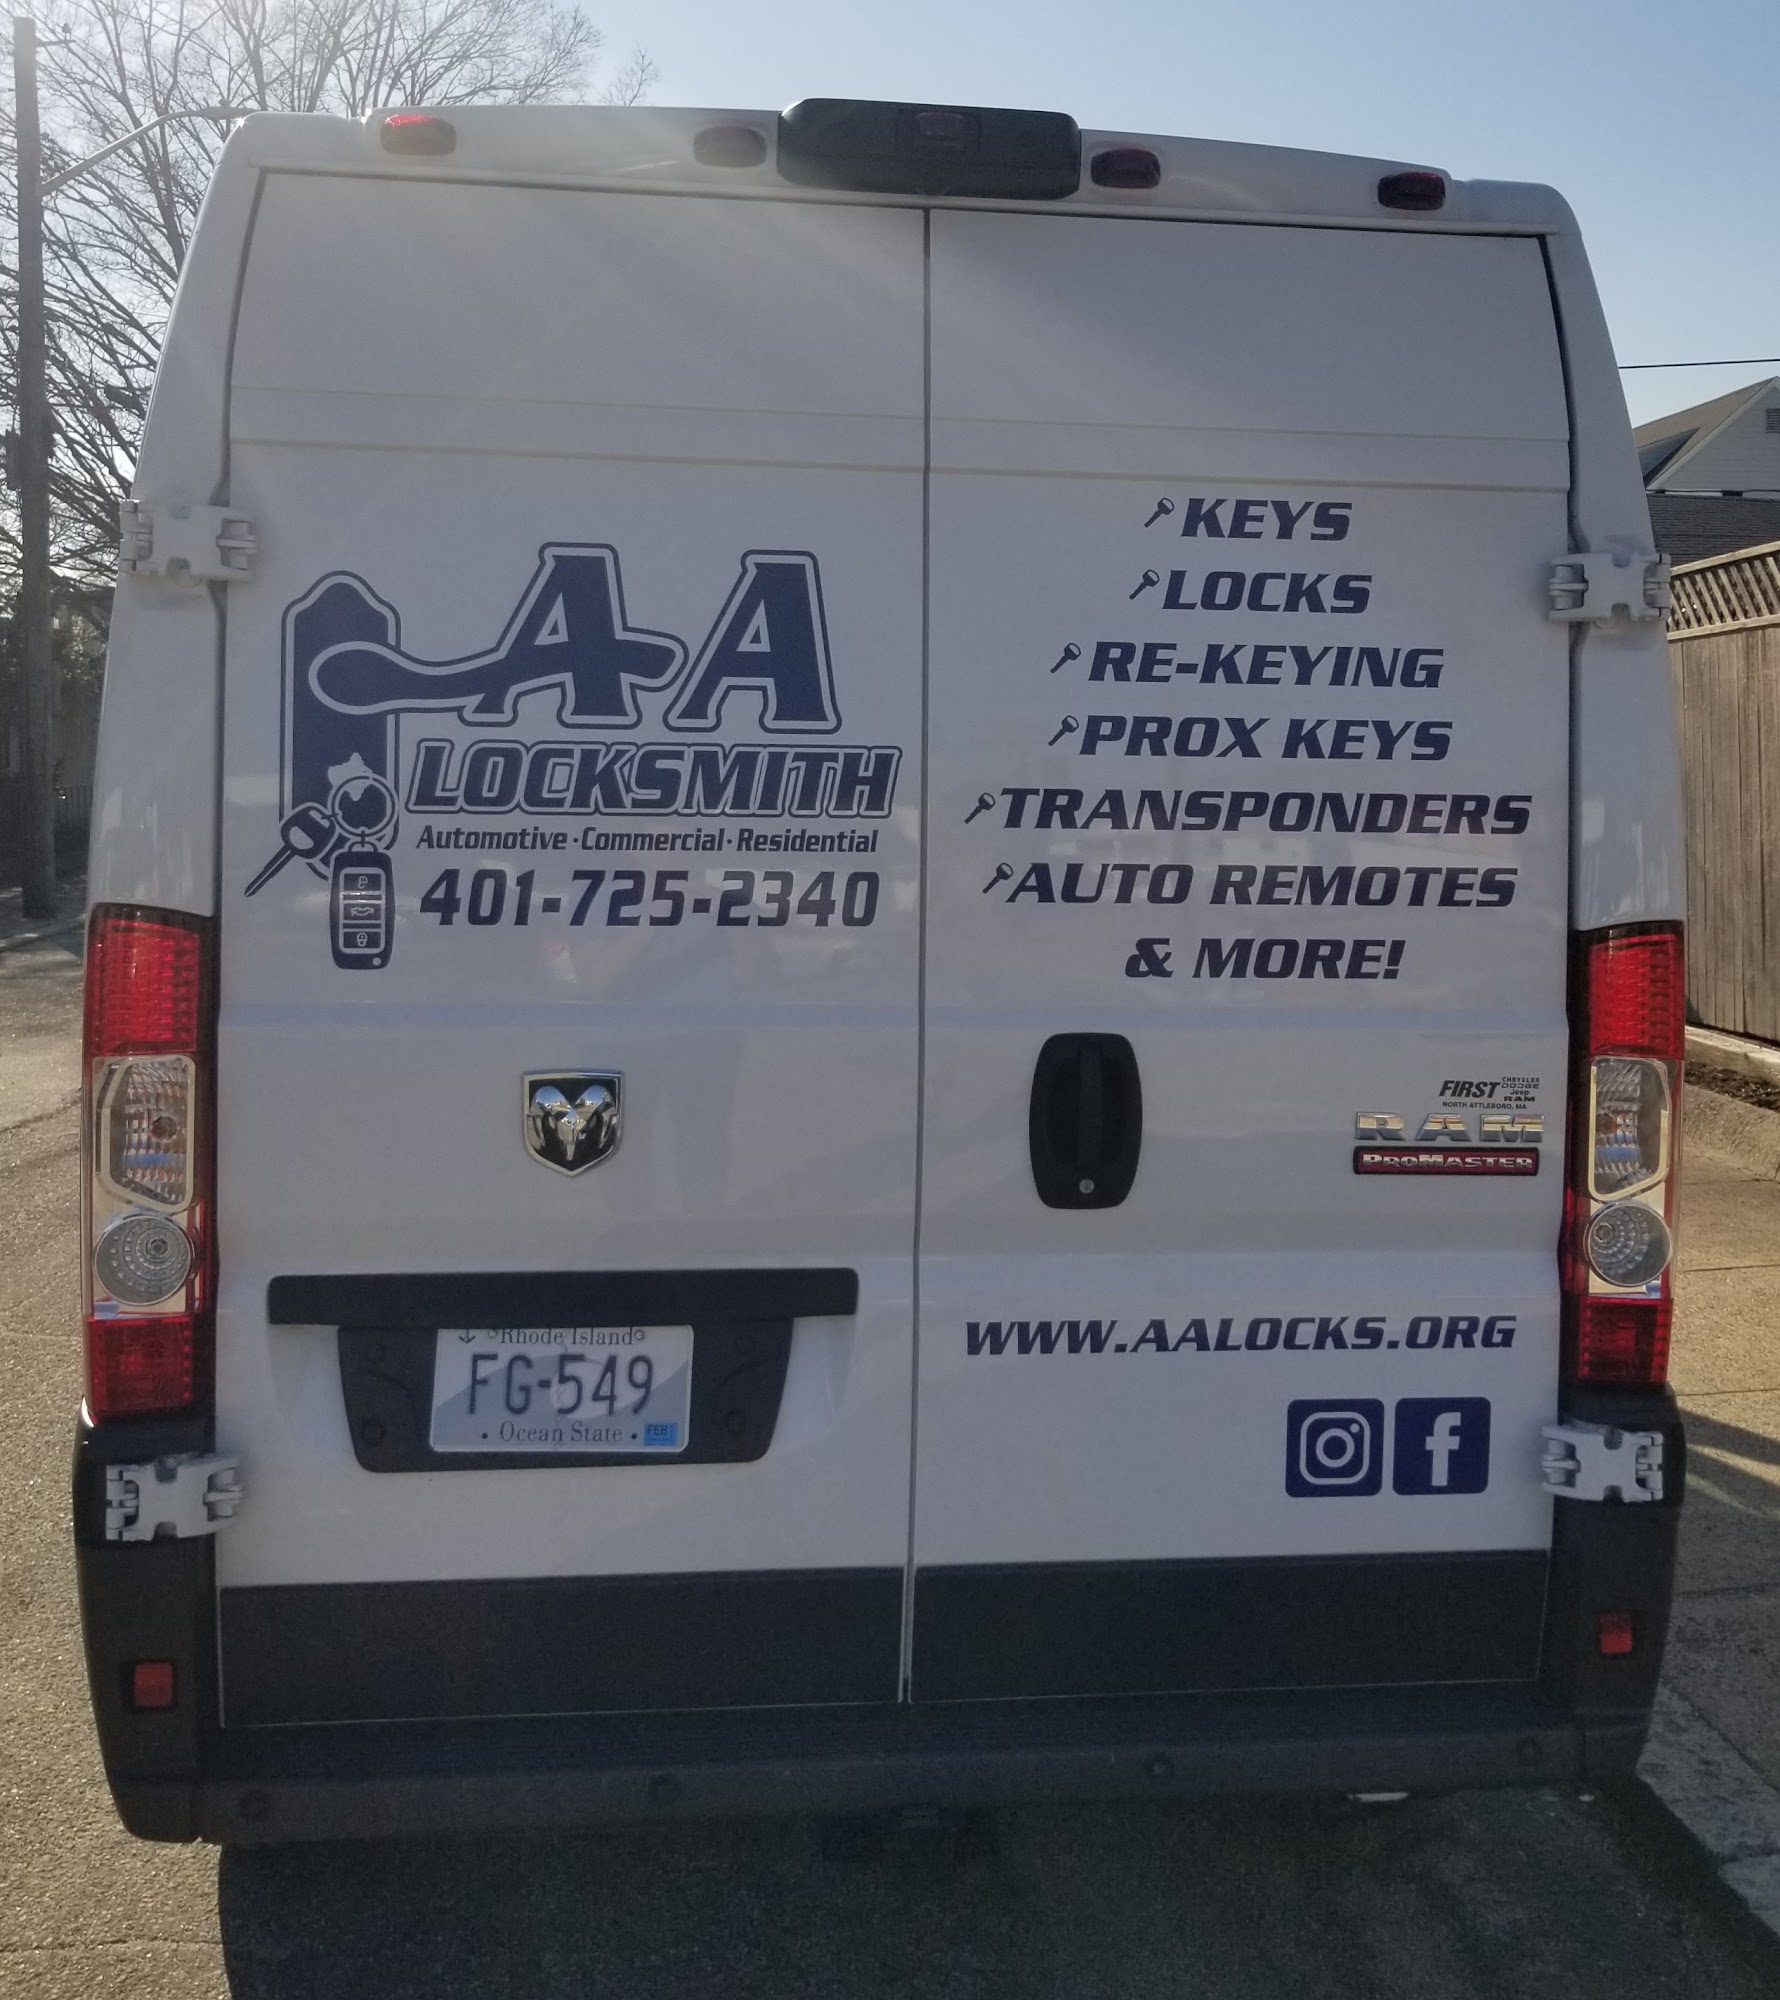 AA Locksmith 1054 Lonsdale Ave, Central Falls Rhode Island 02863